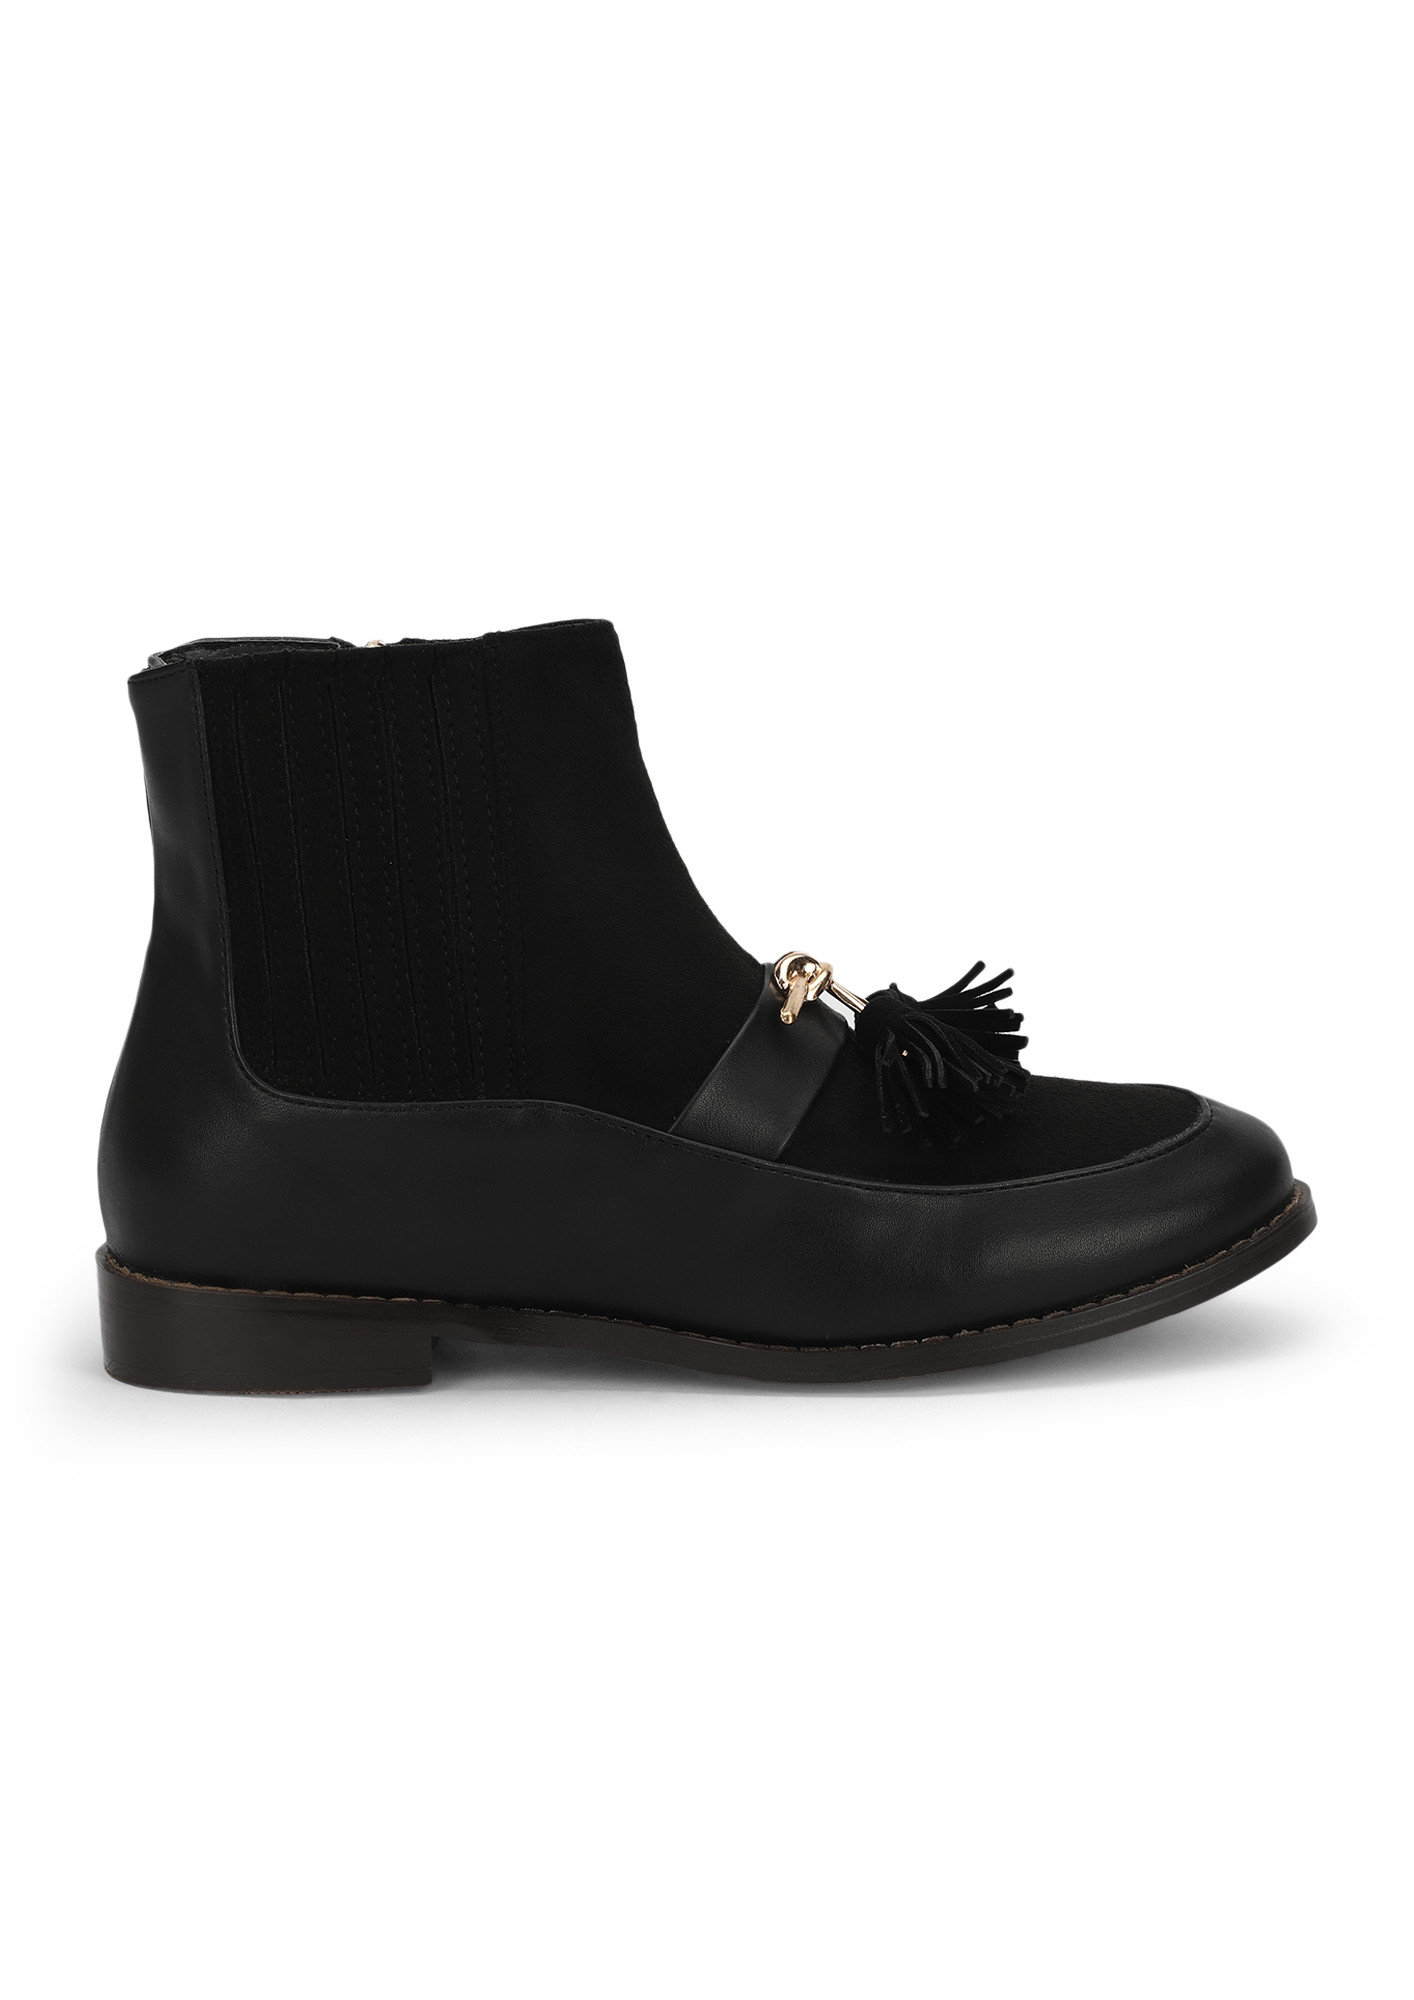 SUCH IS MY STYLE BLACK ANKLE BOOTS